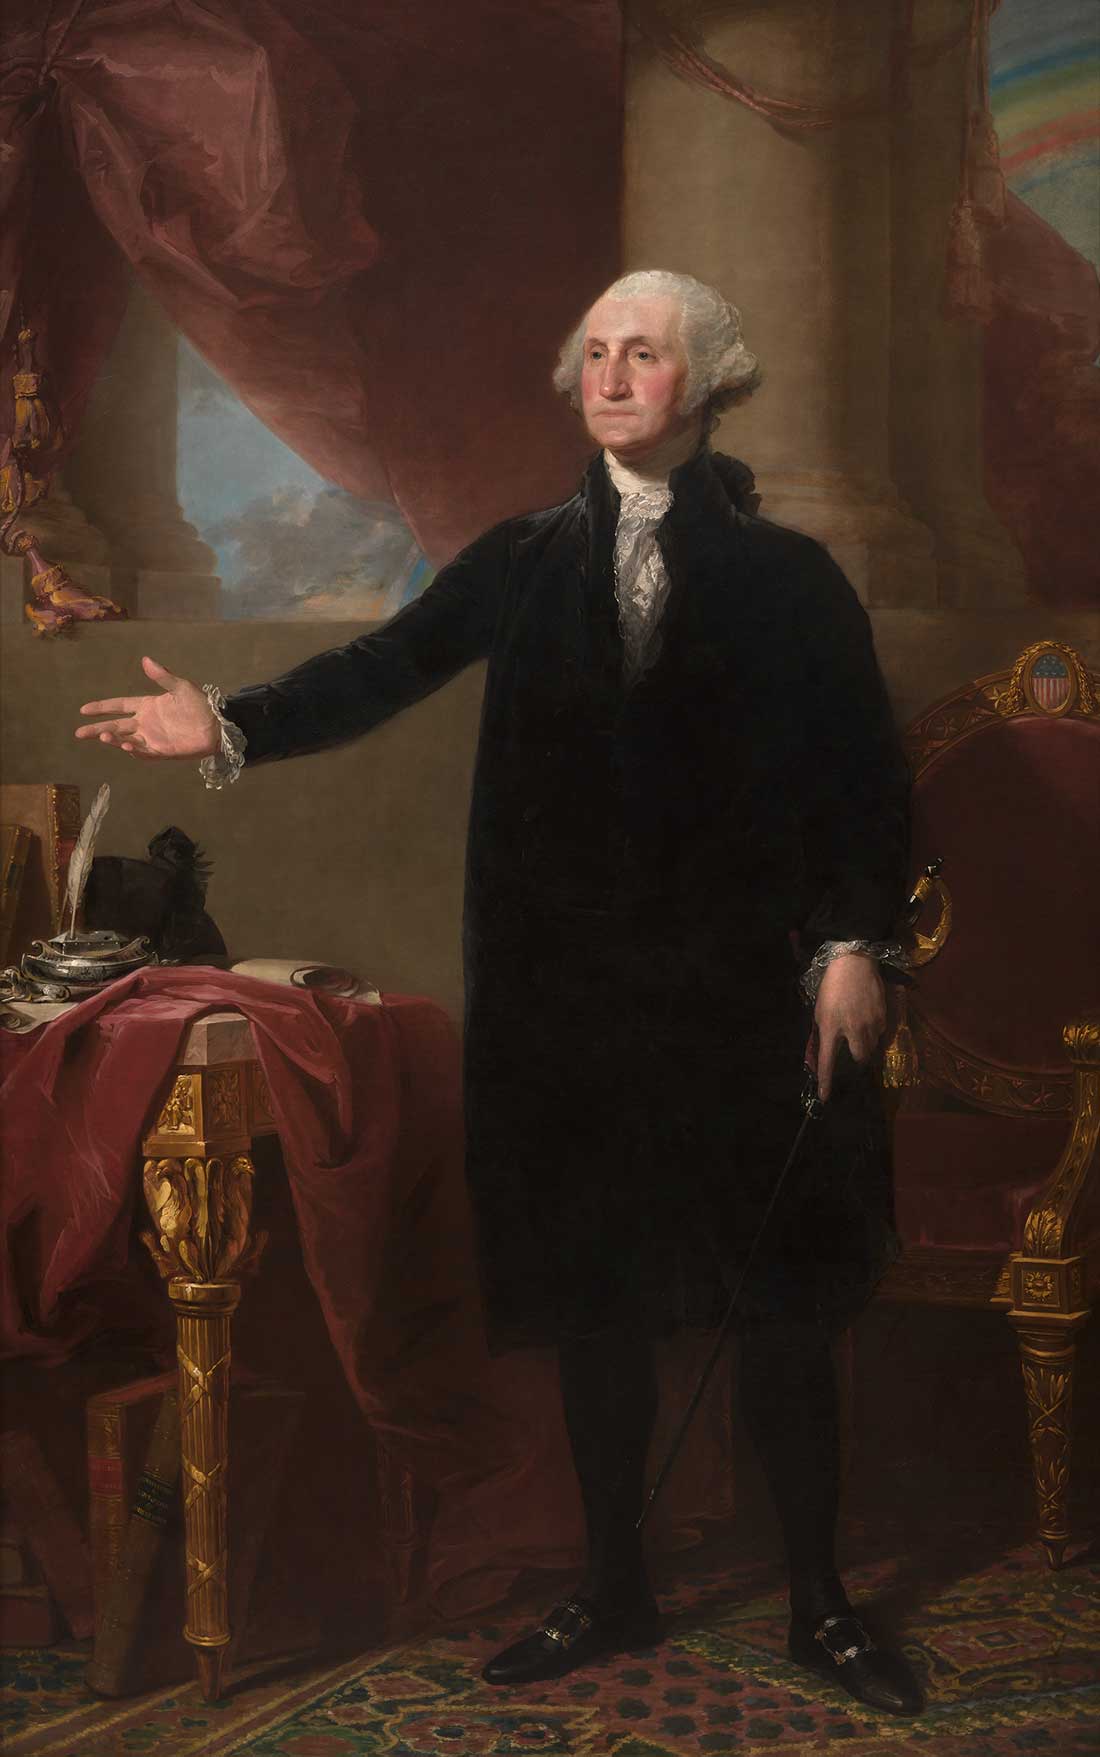 Painted portrait of George Washington with hand outstretched